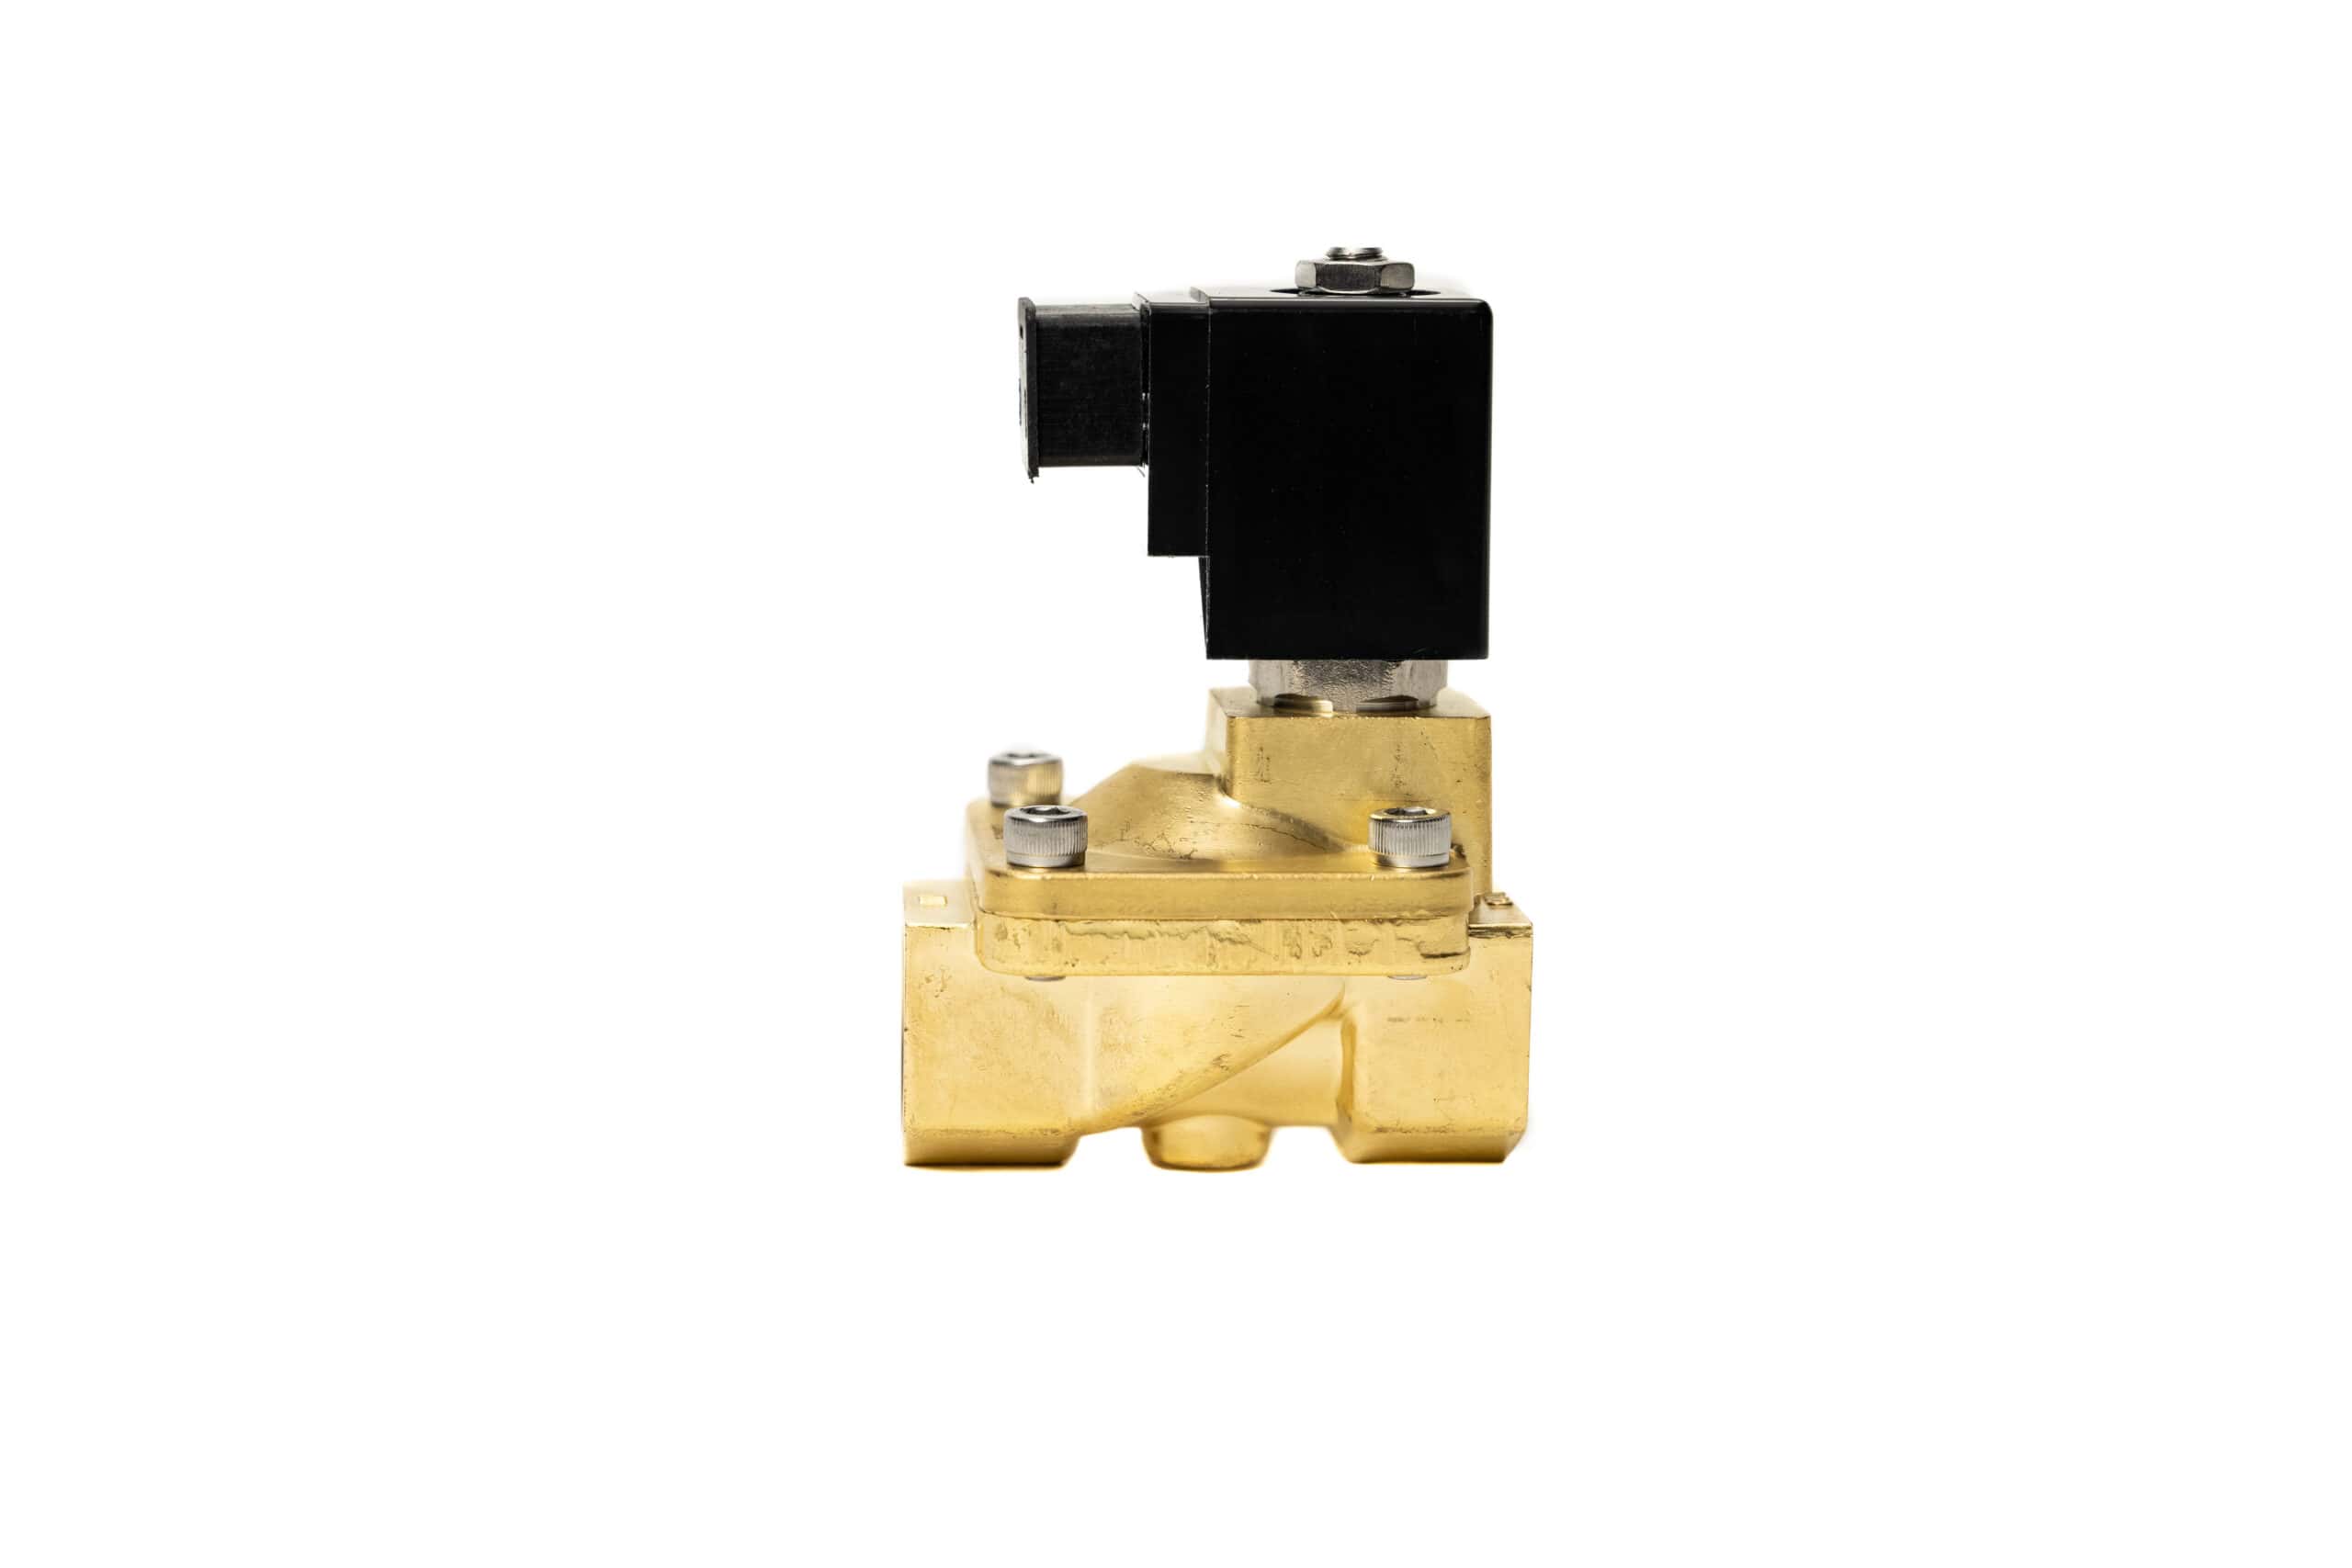 Applications And Uses for AGS Water Solenoid Valves: Enhancing Control and Safety